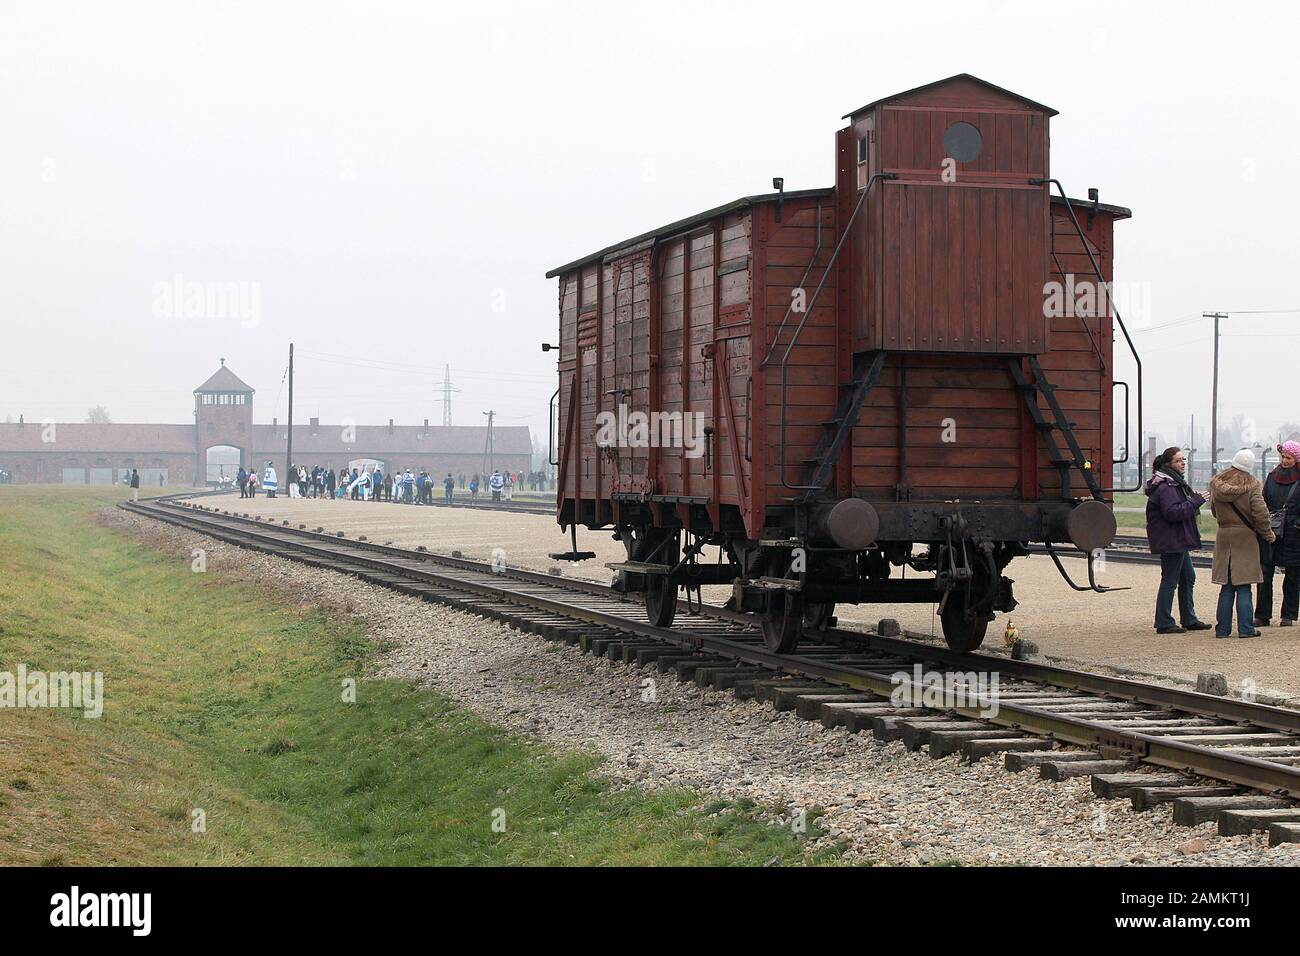 Railway car, as used for the transport of deportees, on the site of the memorial in the former concentration camp Auschwitz - Birkenau. [automated translation] Stock Photo